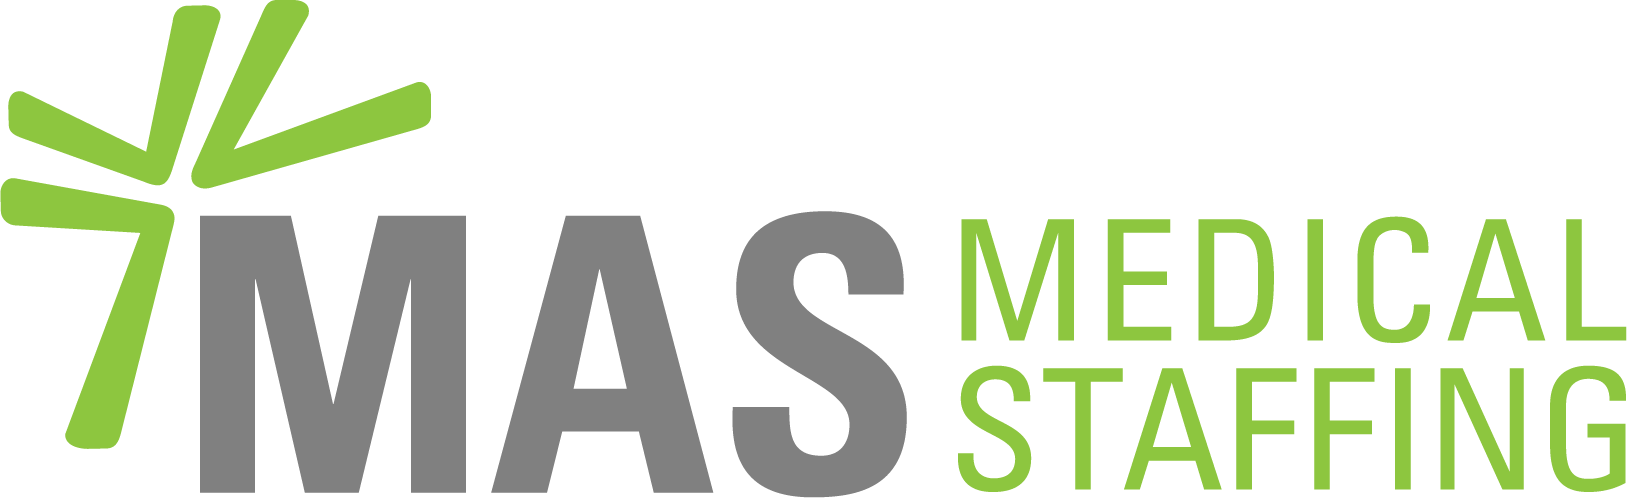 Featured Image for MAS Medical Staffing